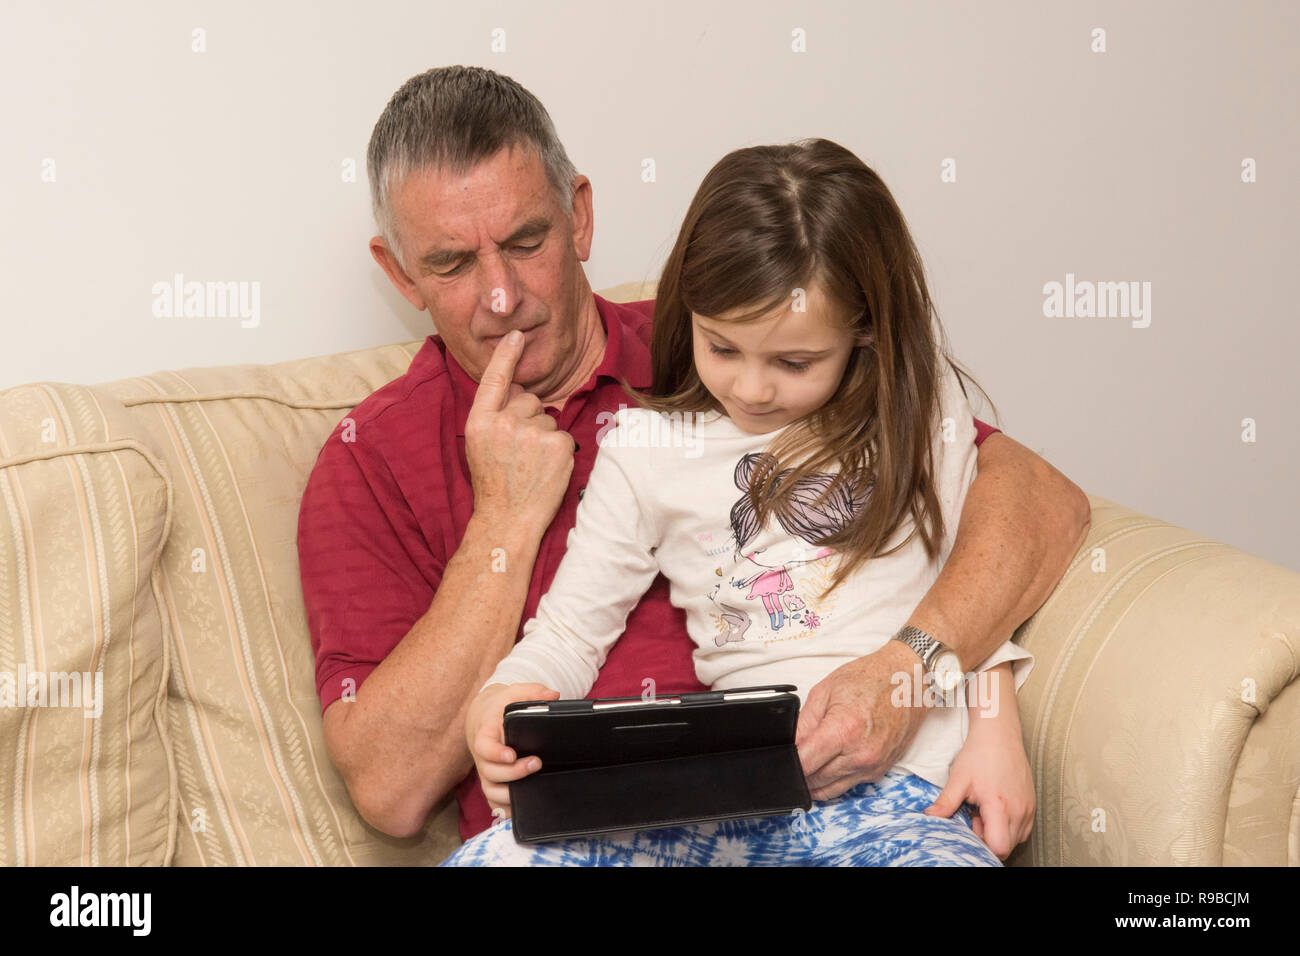 granddaughter  helping grandfather with tablet, electronic device, social media, modern technology. girl helping ageing father with iPad, tablet. Stock Photo